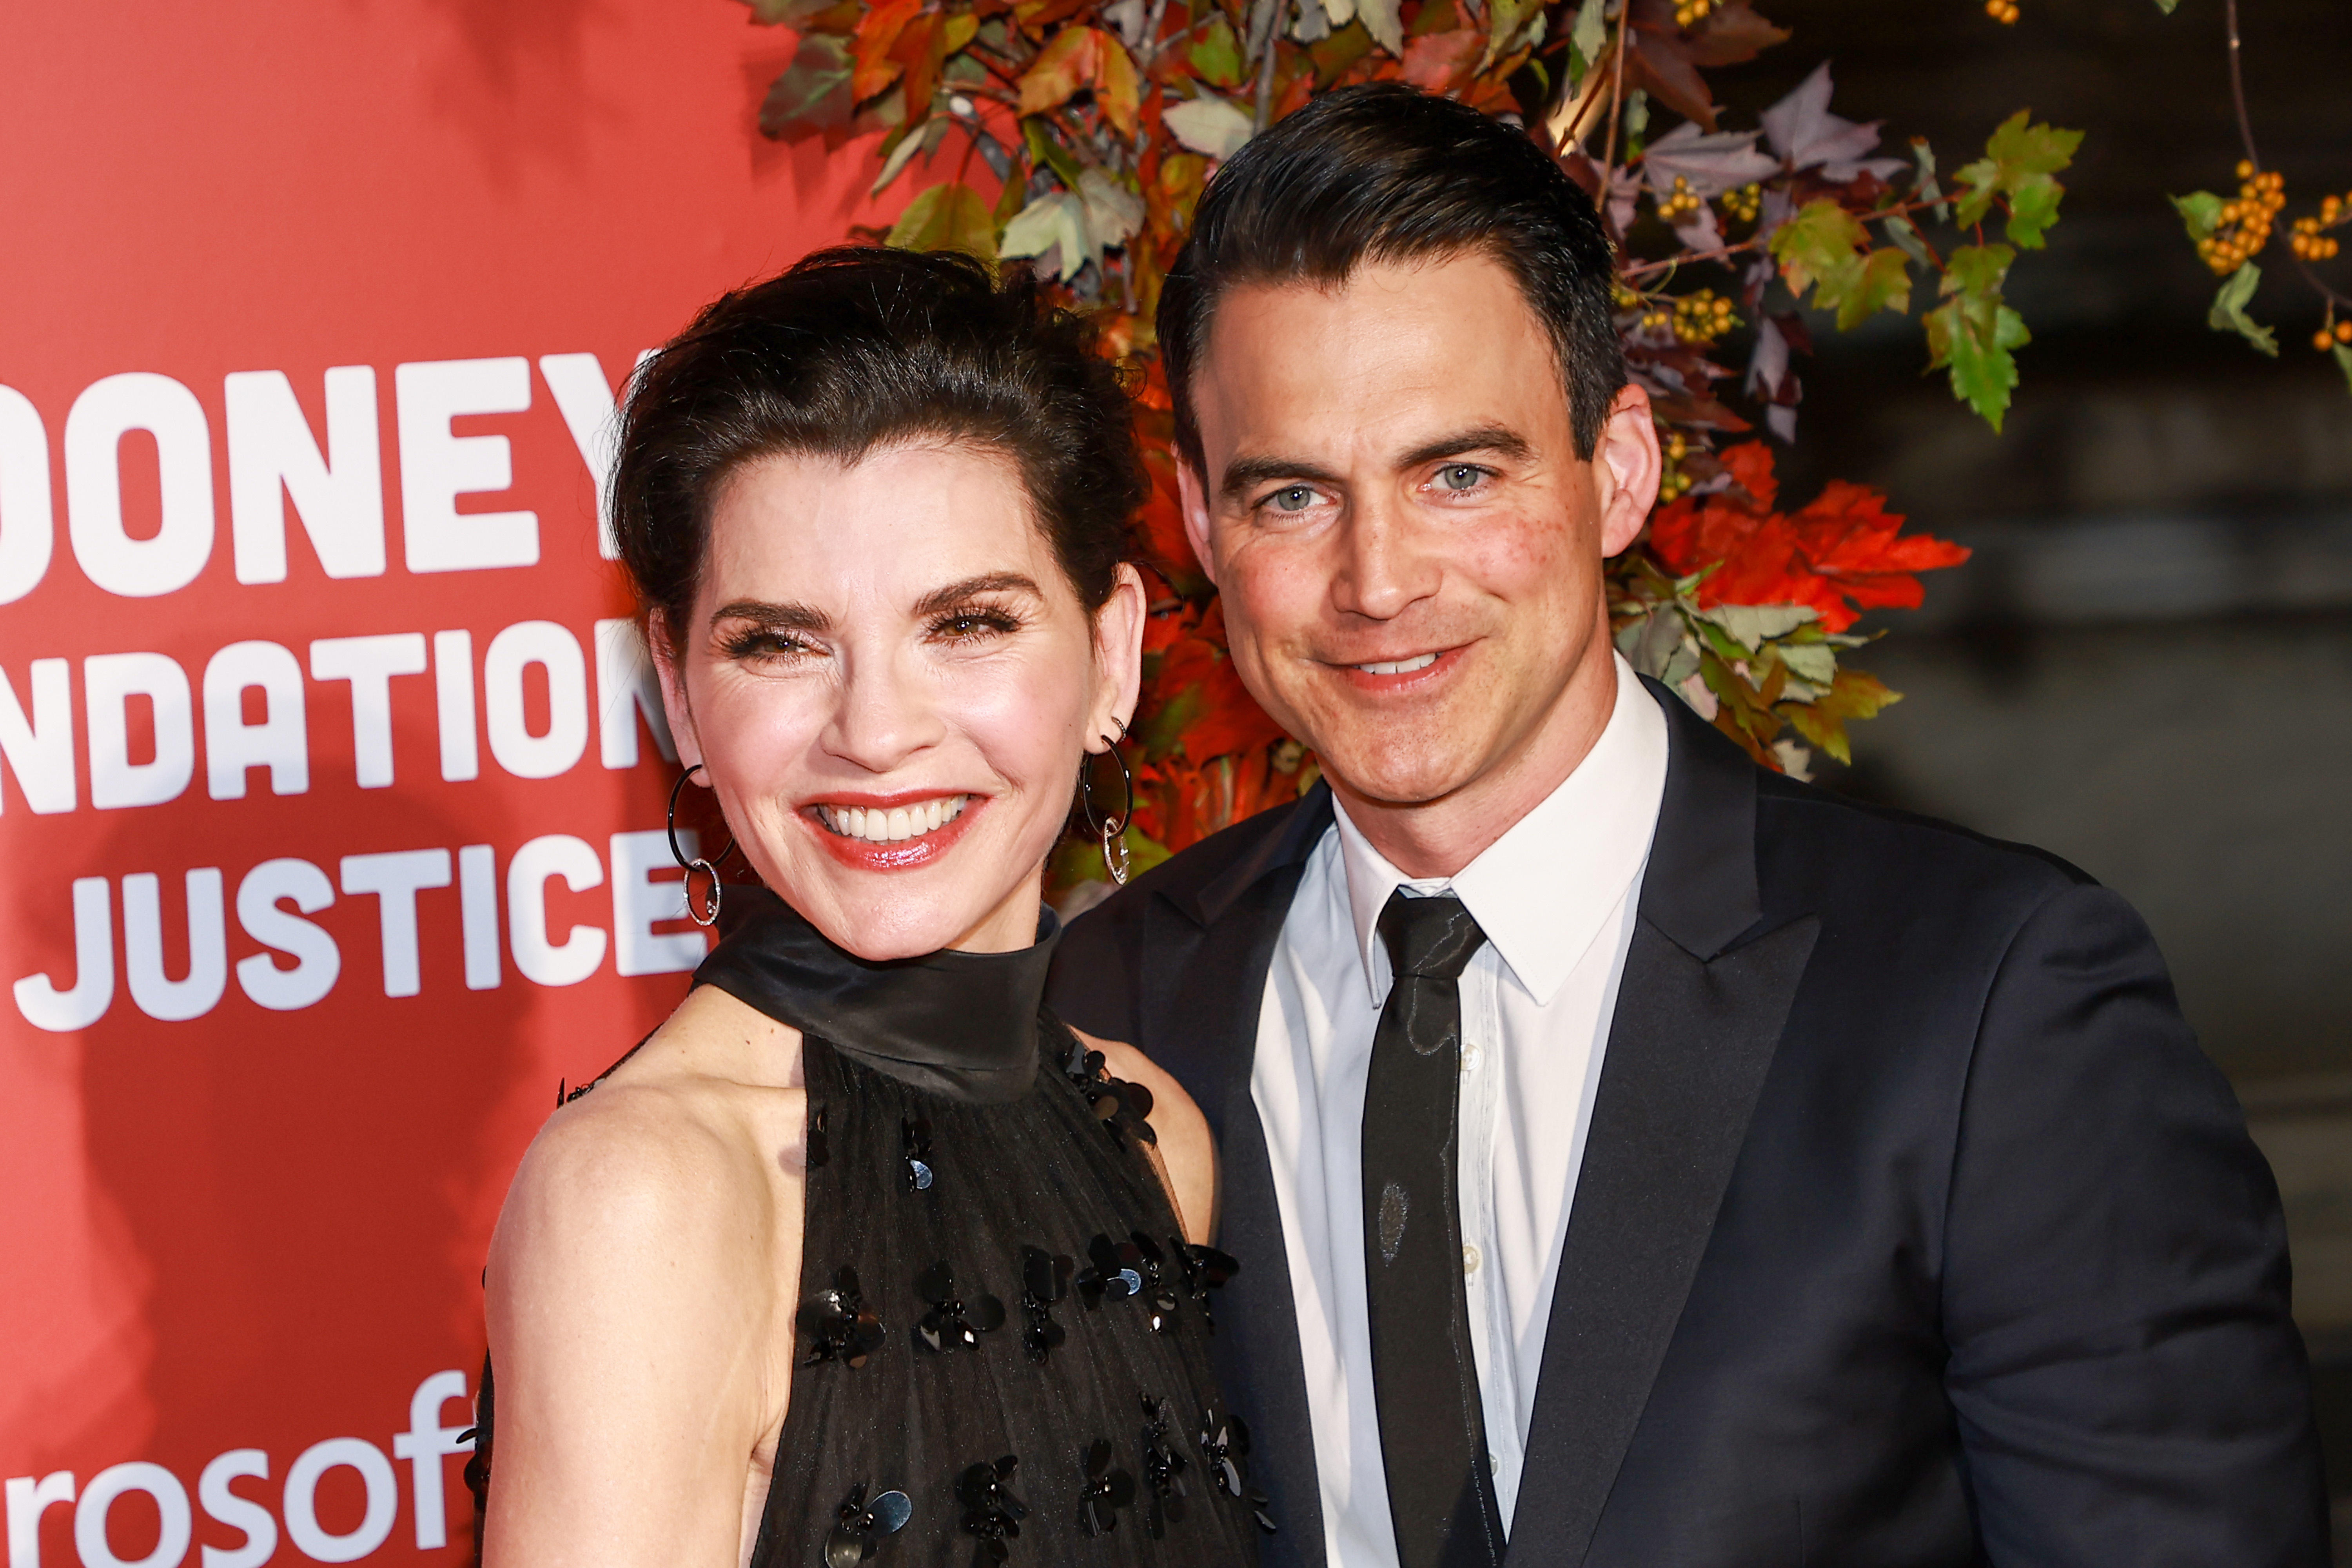 Julianna Margulies and Keith Lieberthal at the Clooney Foundation For Justice Inaugural Albie Awards on September 29, 2022, in New York City. | Source: Getty Images